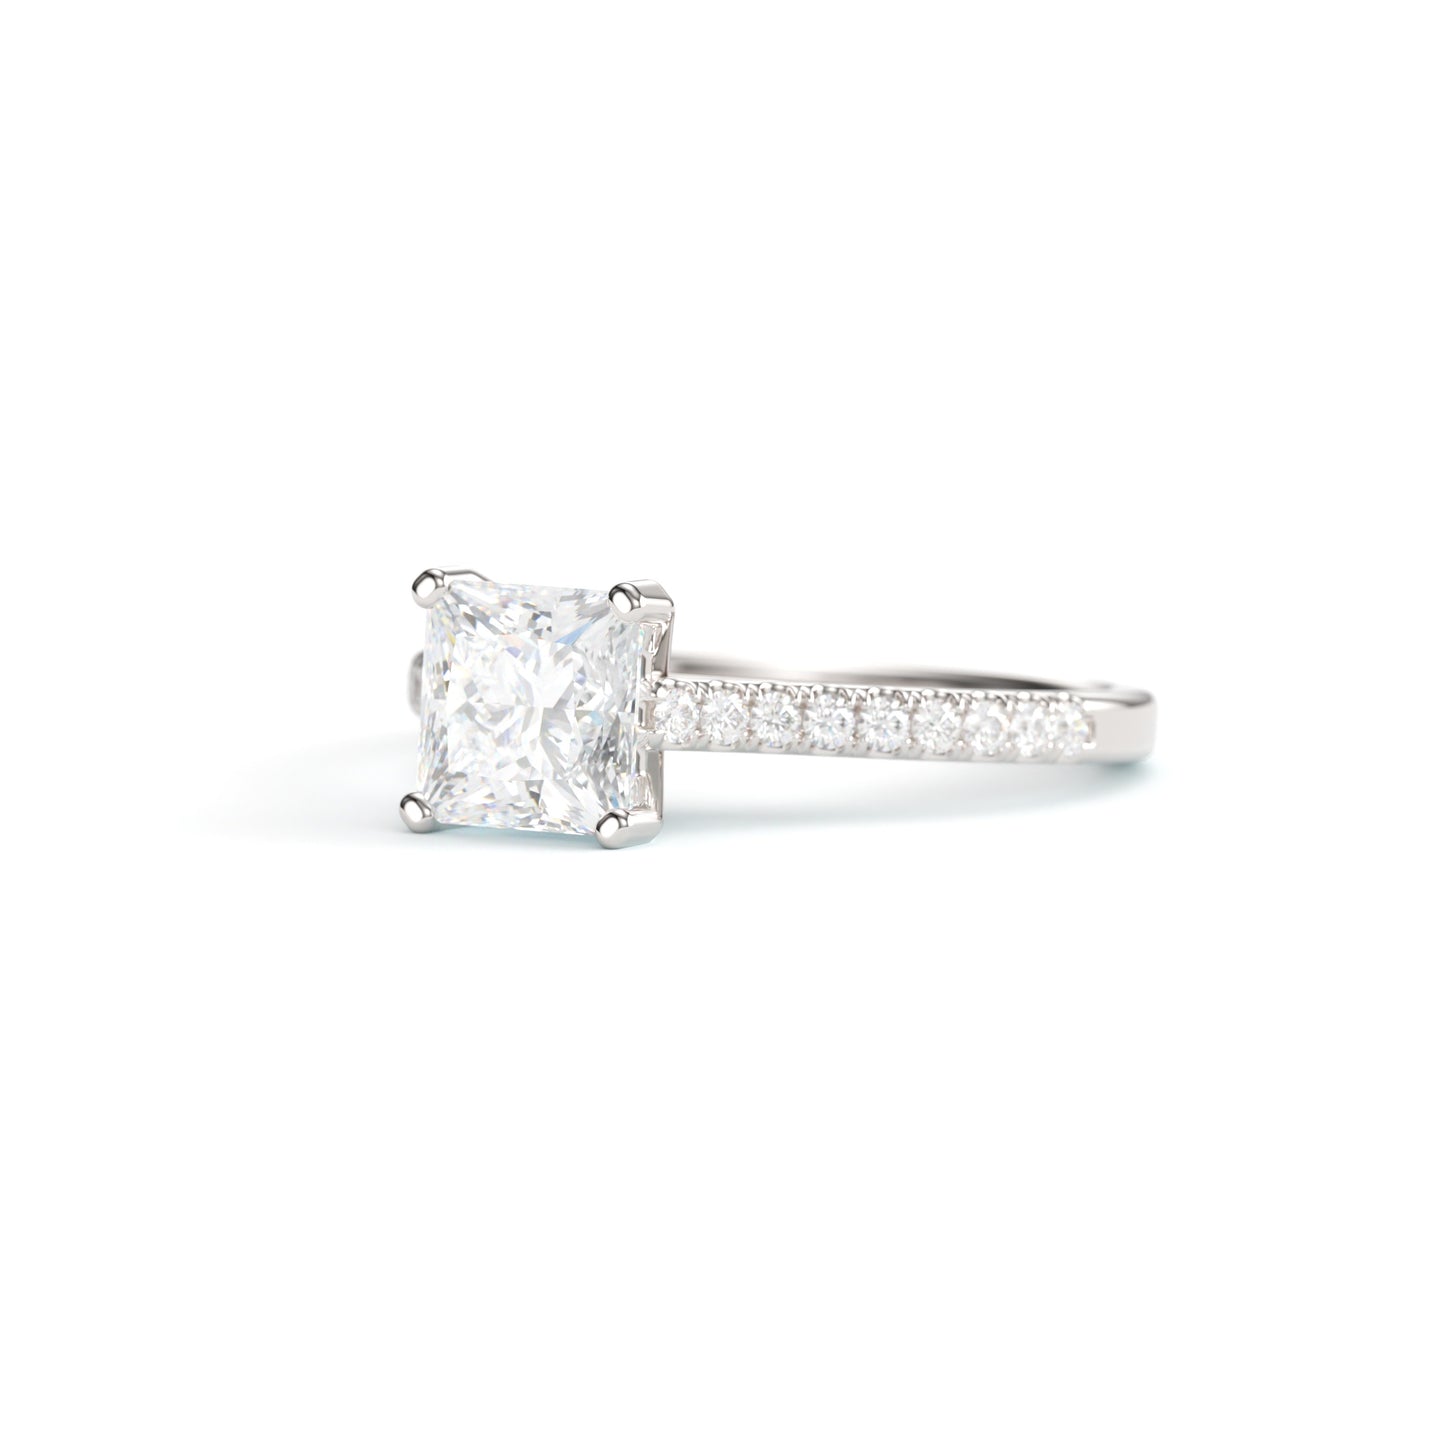 Princess Solitaire on a Classic Pave Diamond Band.